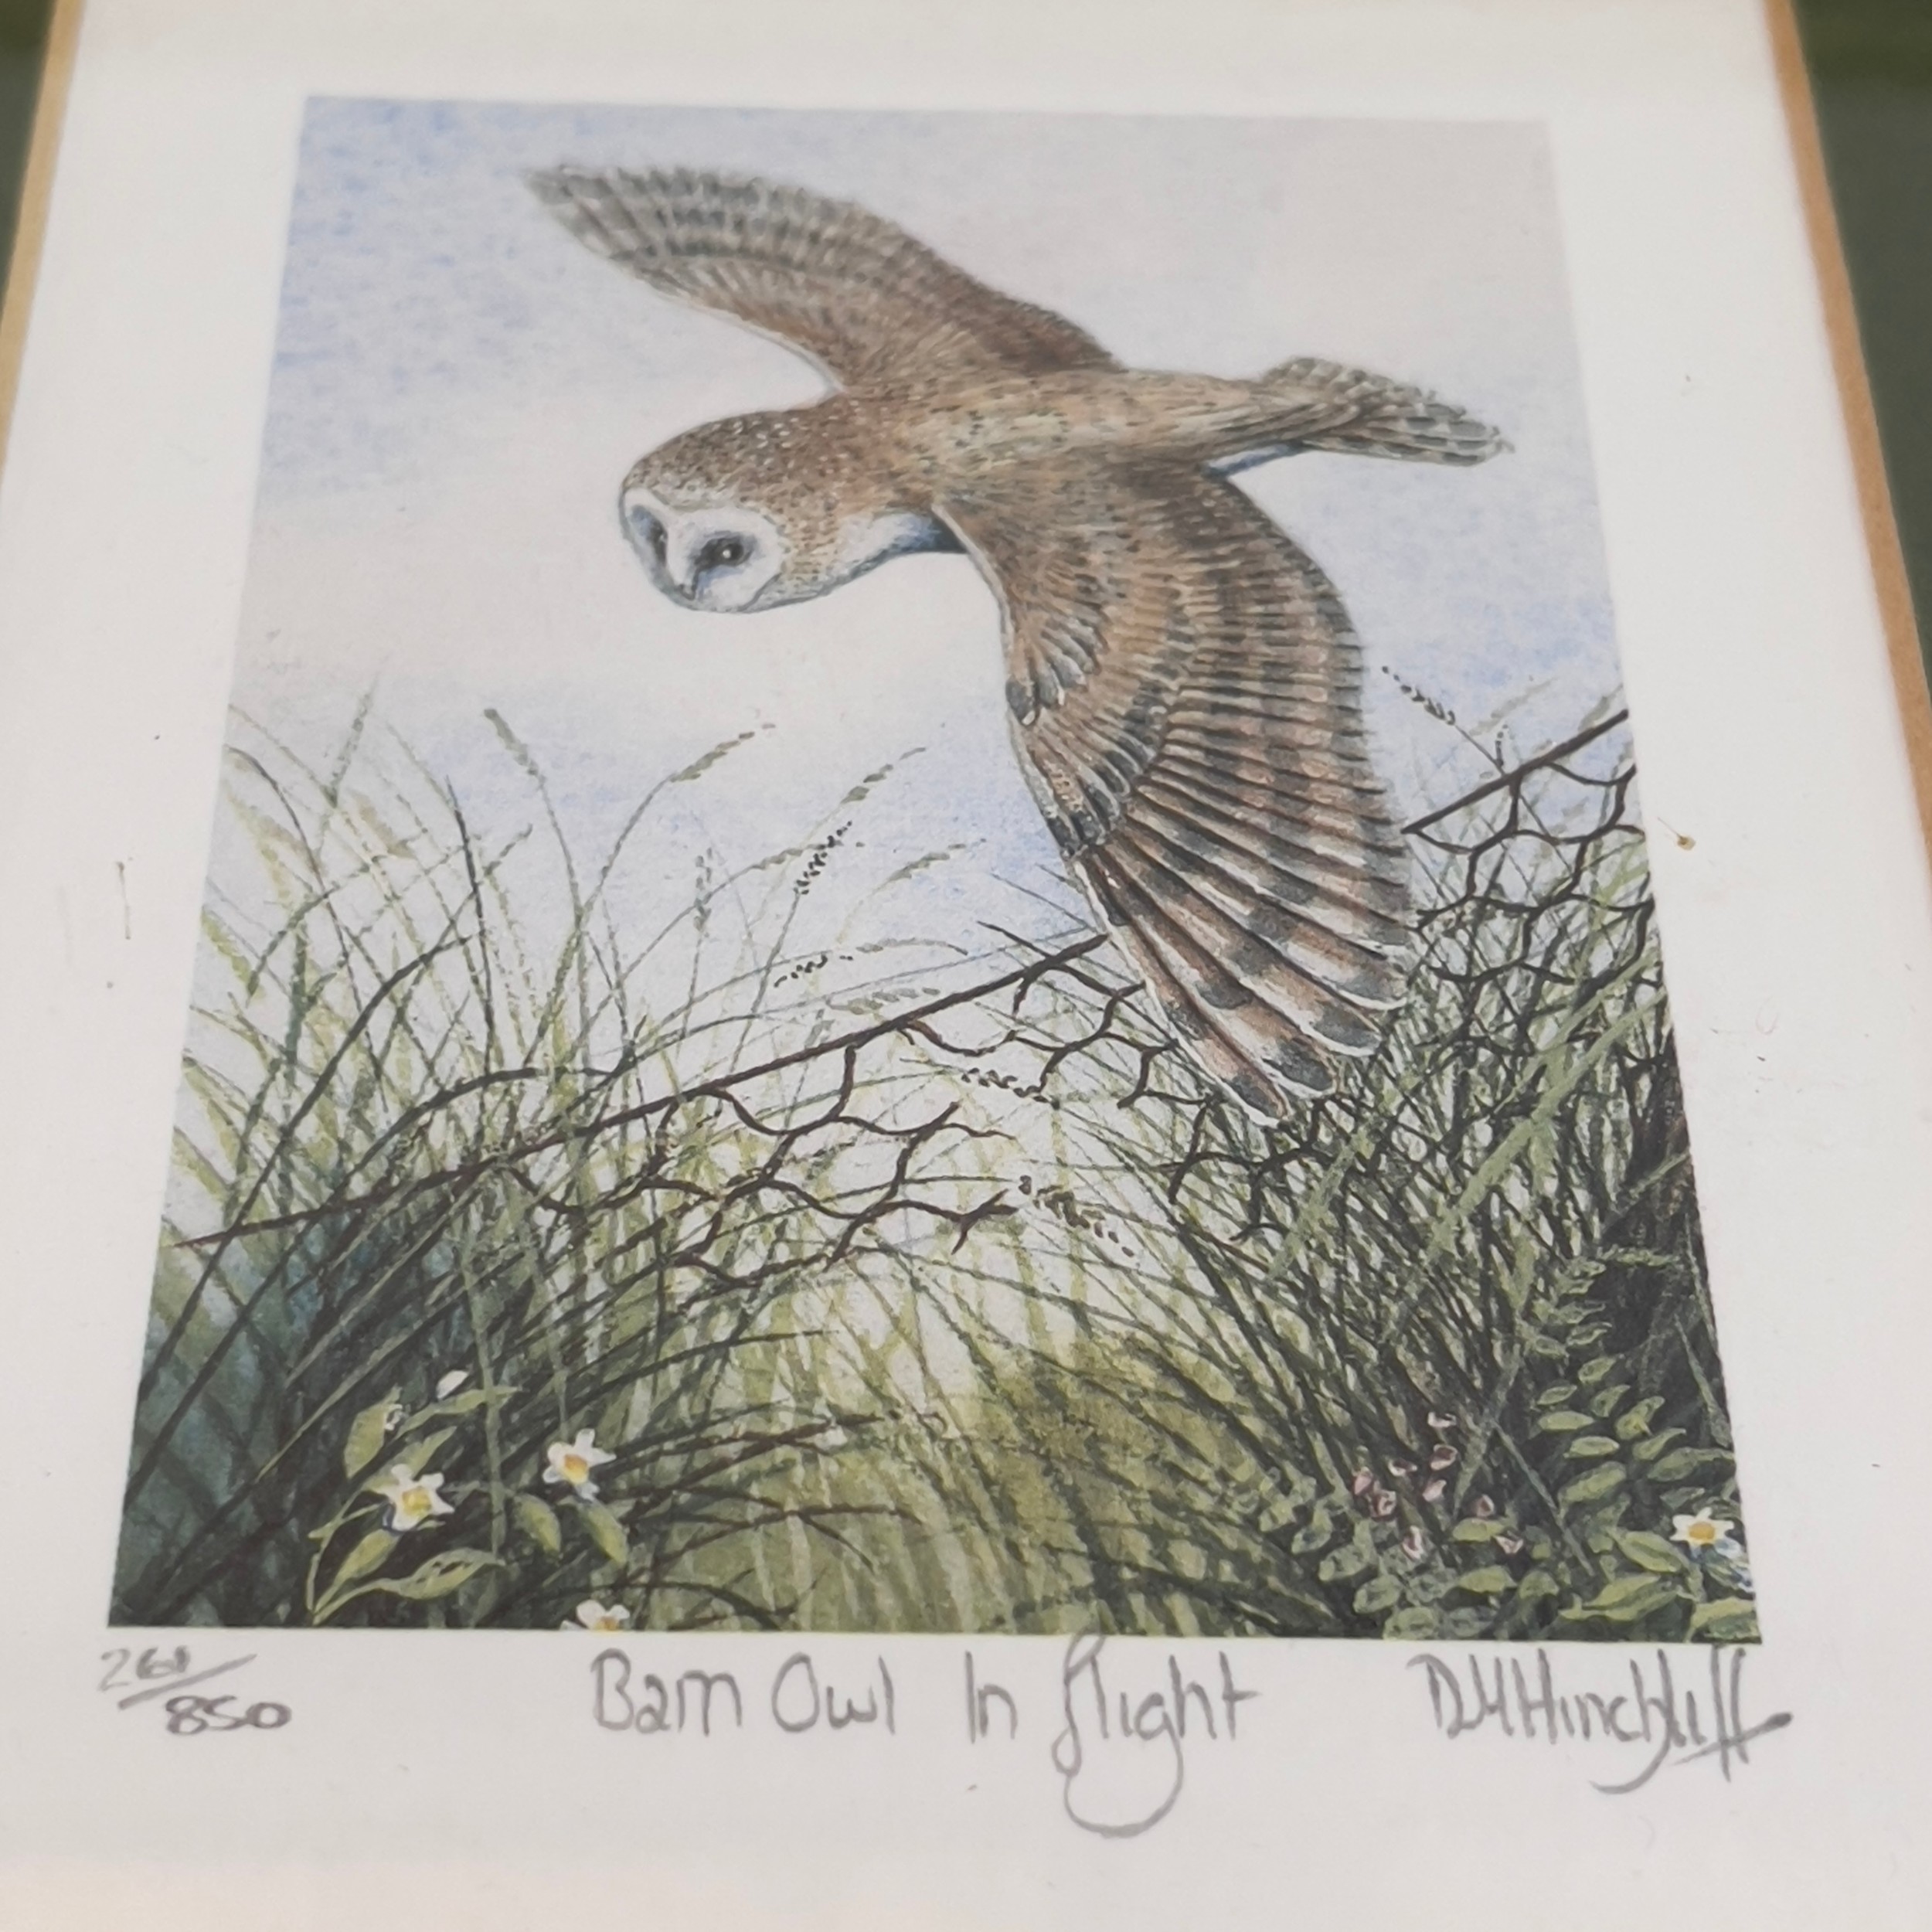 After D. M. Hinchliff, Barn owl in Flight and Pheasant in Flight, limited colour prints, 261/850 and - Image 3 of 3